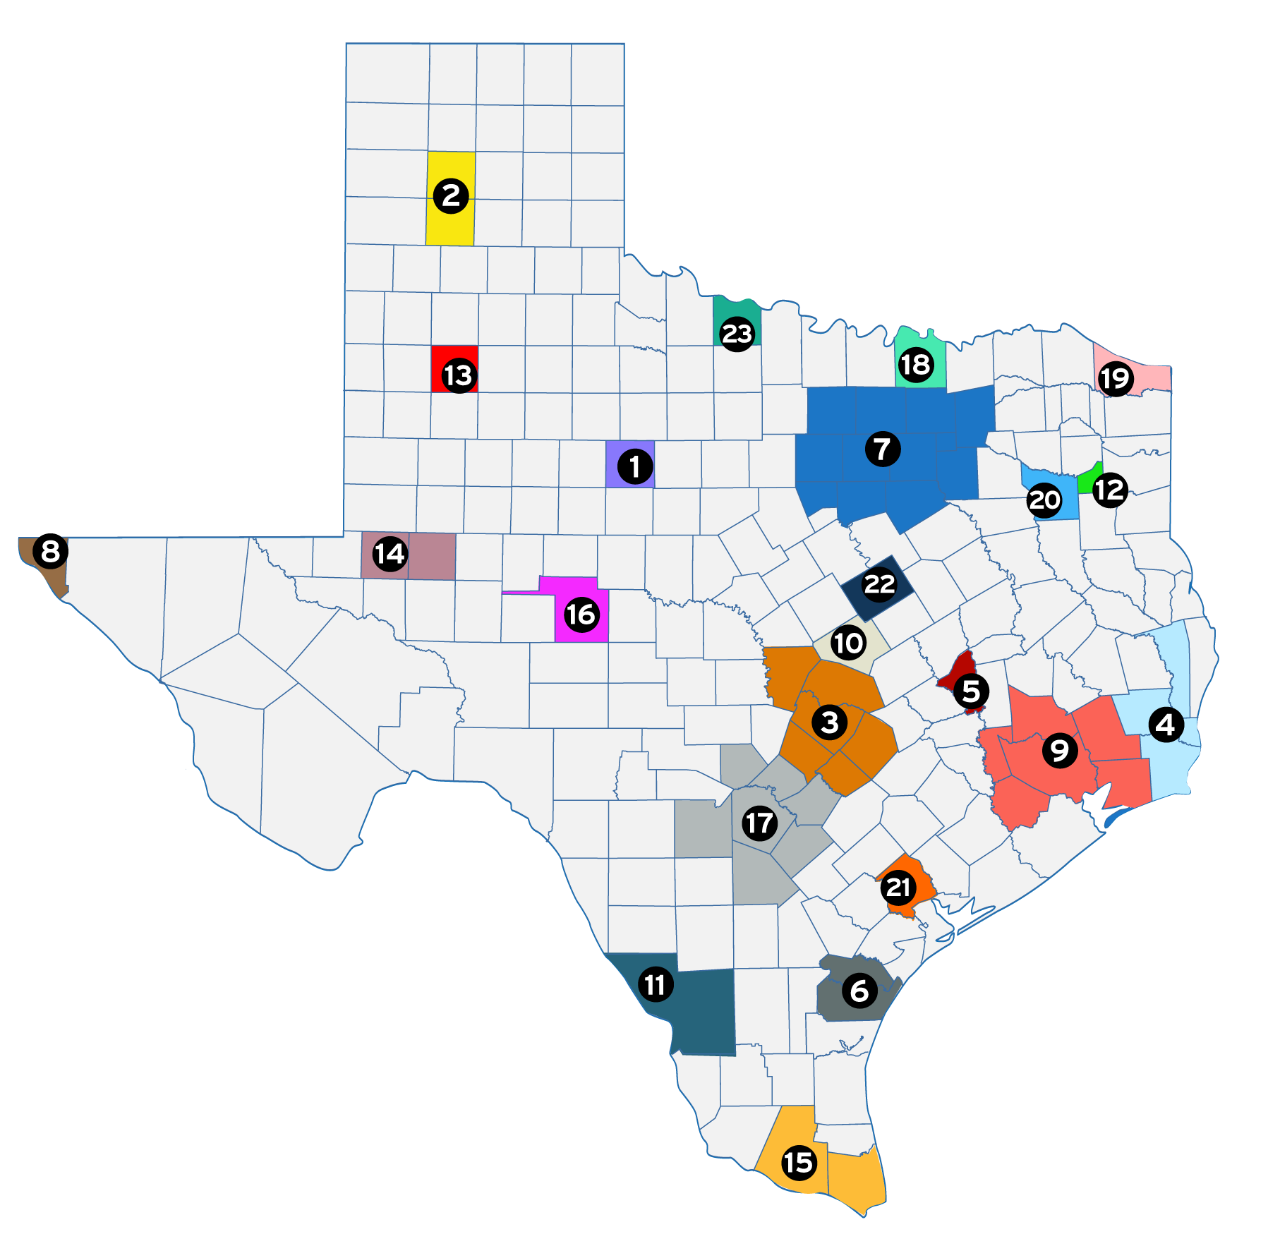 Texas county map for the Texas Travel Survey